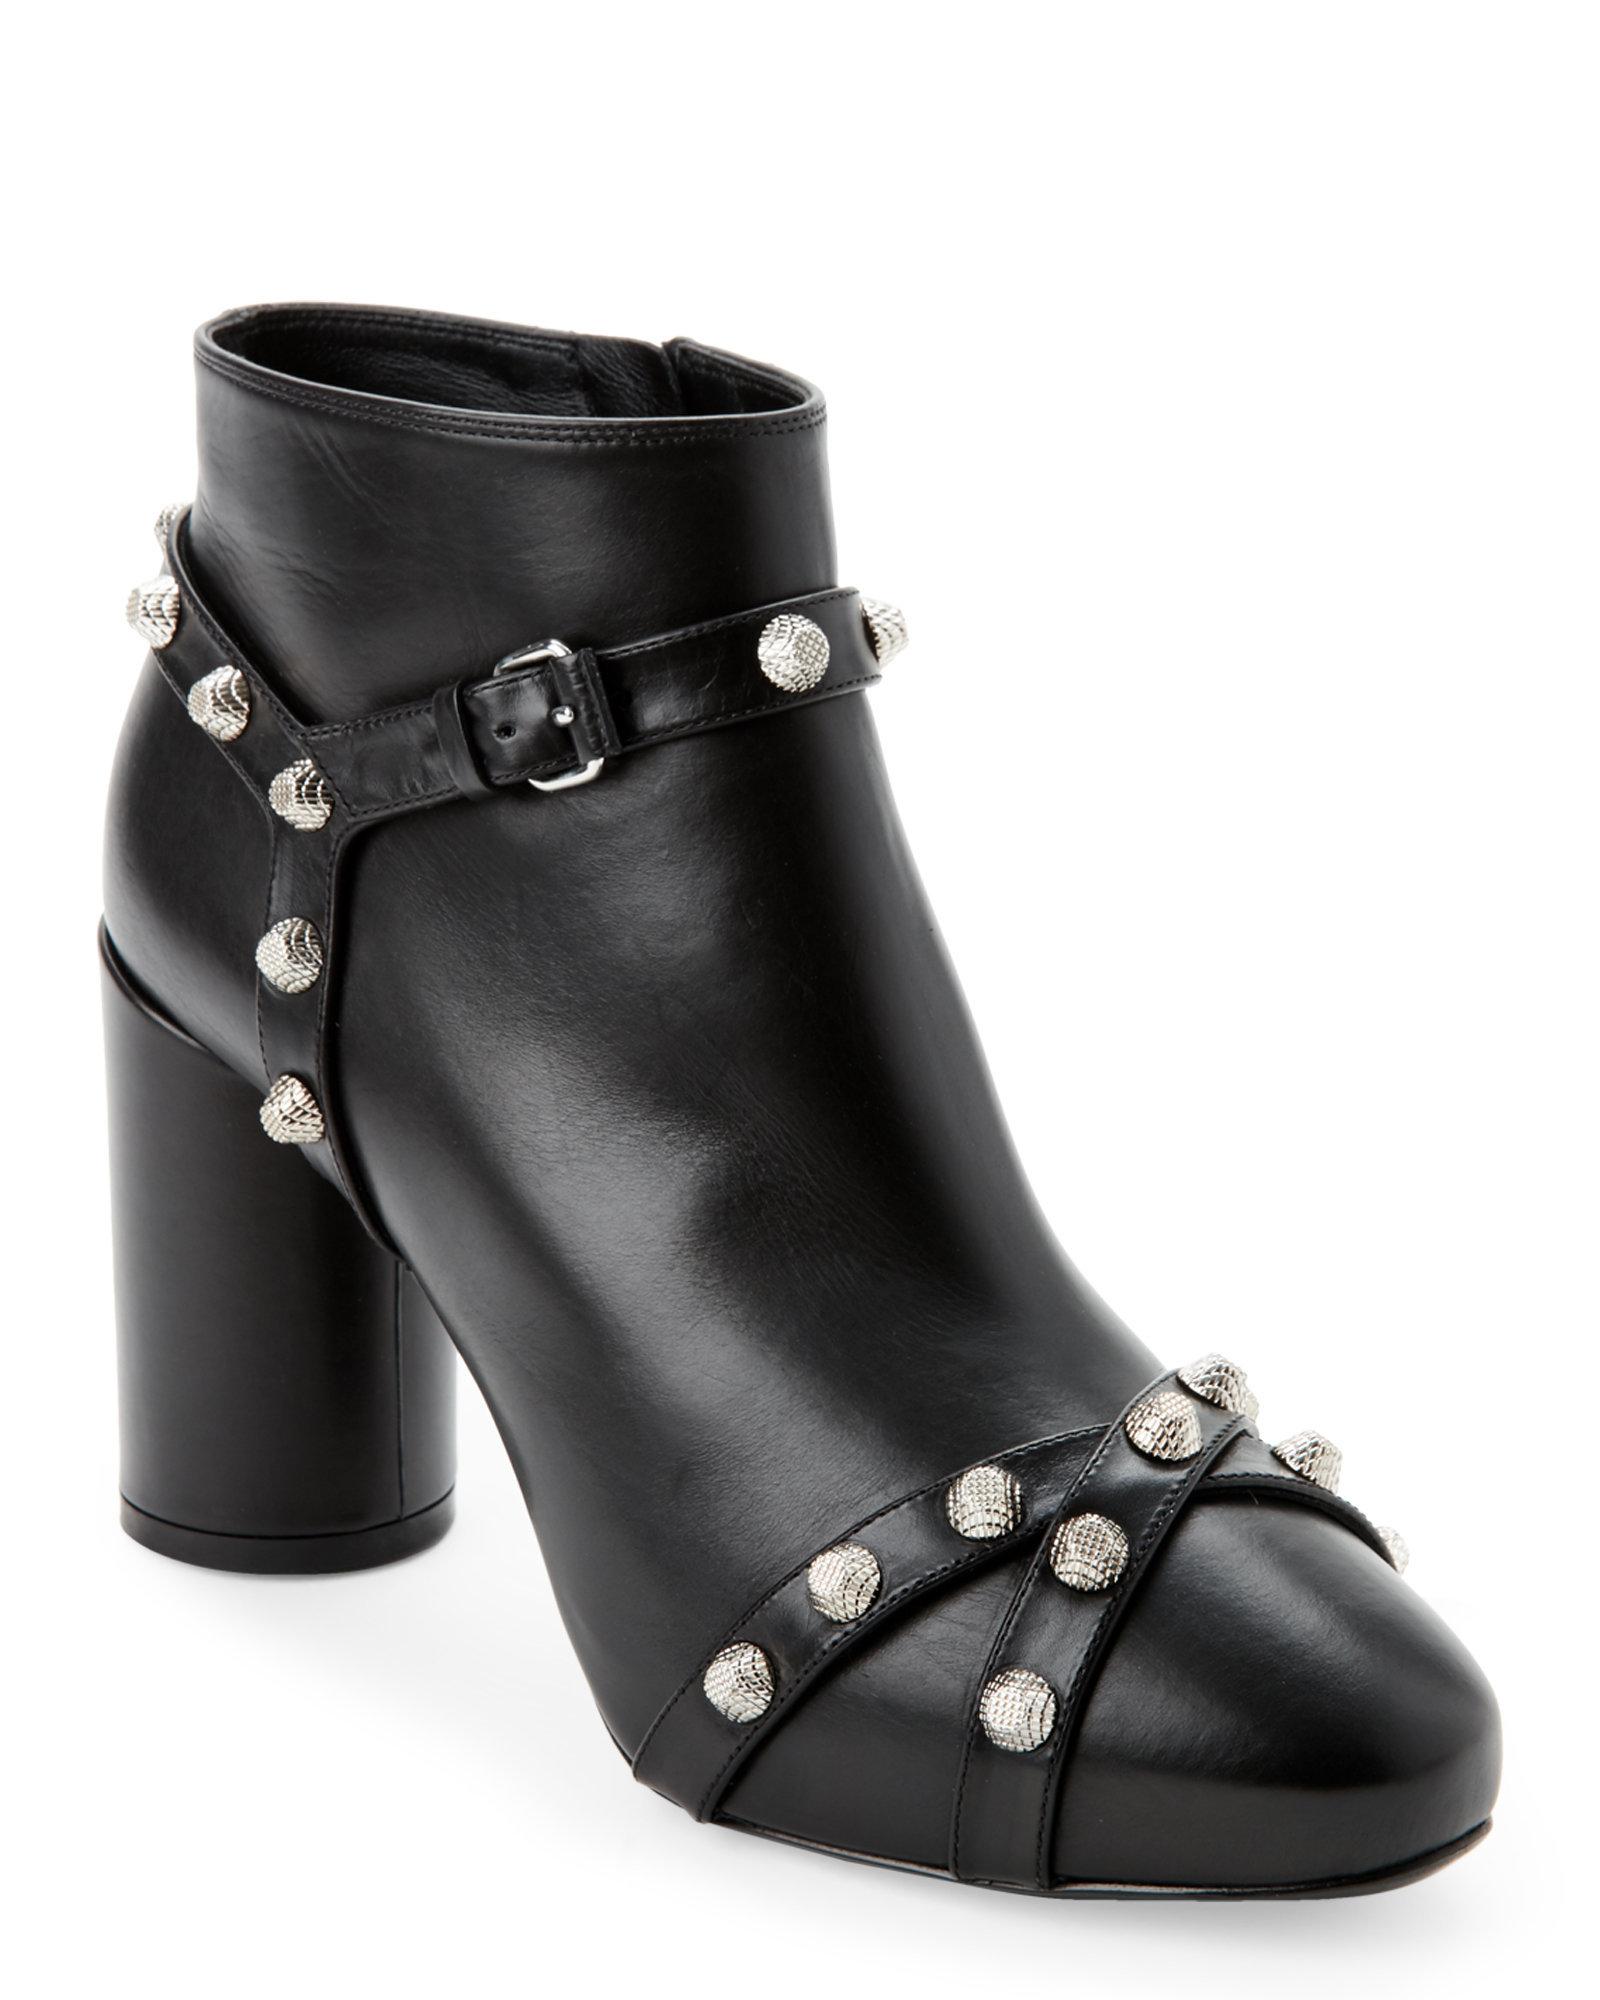 Balenciaga Leather Black Arena Silver-Stud Ankle Boots - Lyst